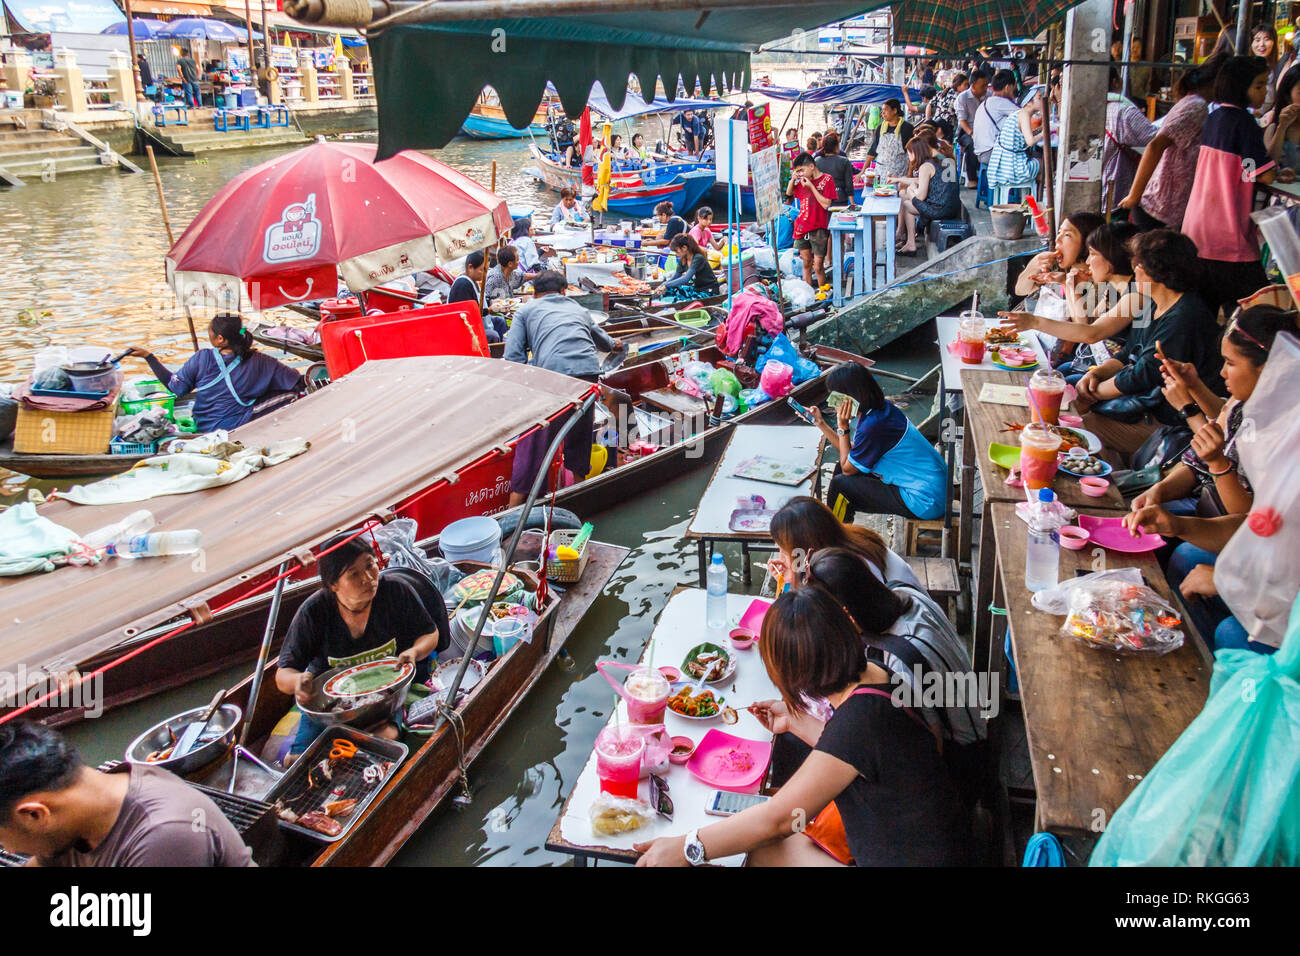 Amphawa, Thailand - 3rd March 2017: Food vendors and diners on the river. The floating market operates at weekend. Stock Photo